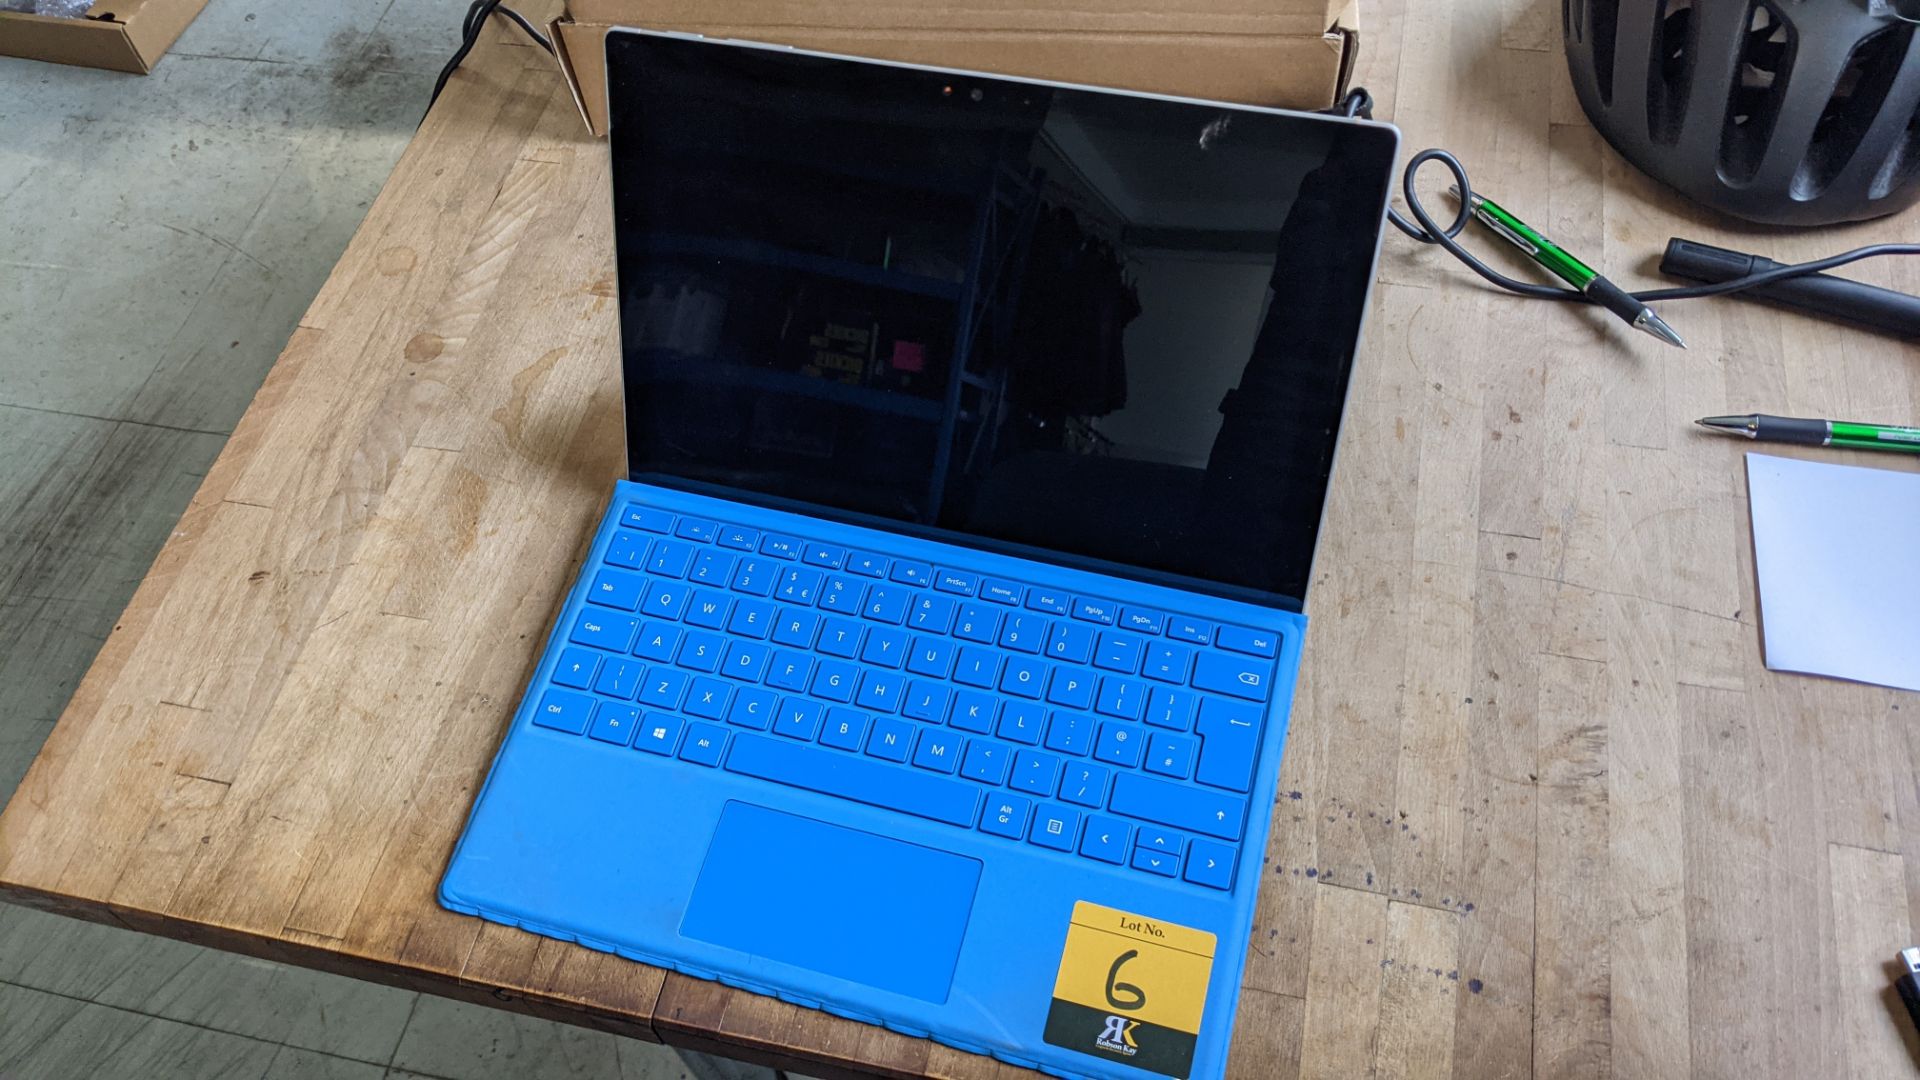 Microsoft Surface Pro 4 notebook computer, Intel Core i5-6300u@2.4GHz, 4Gb RAM, 128Gb SSD, with brig - Image 14 of 17